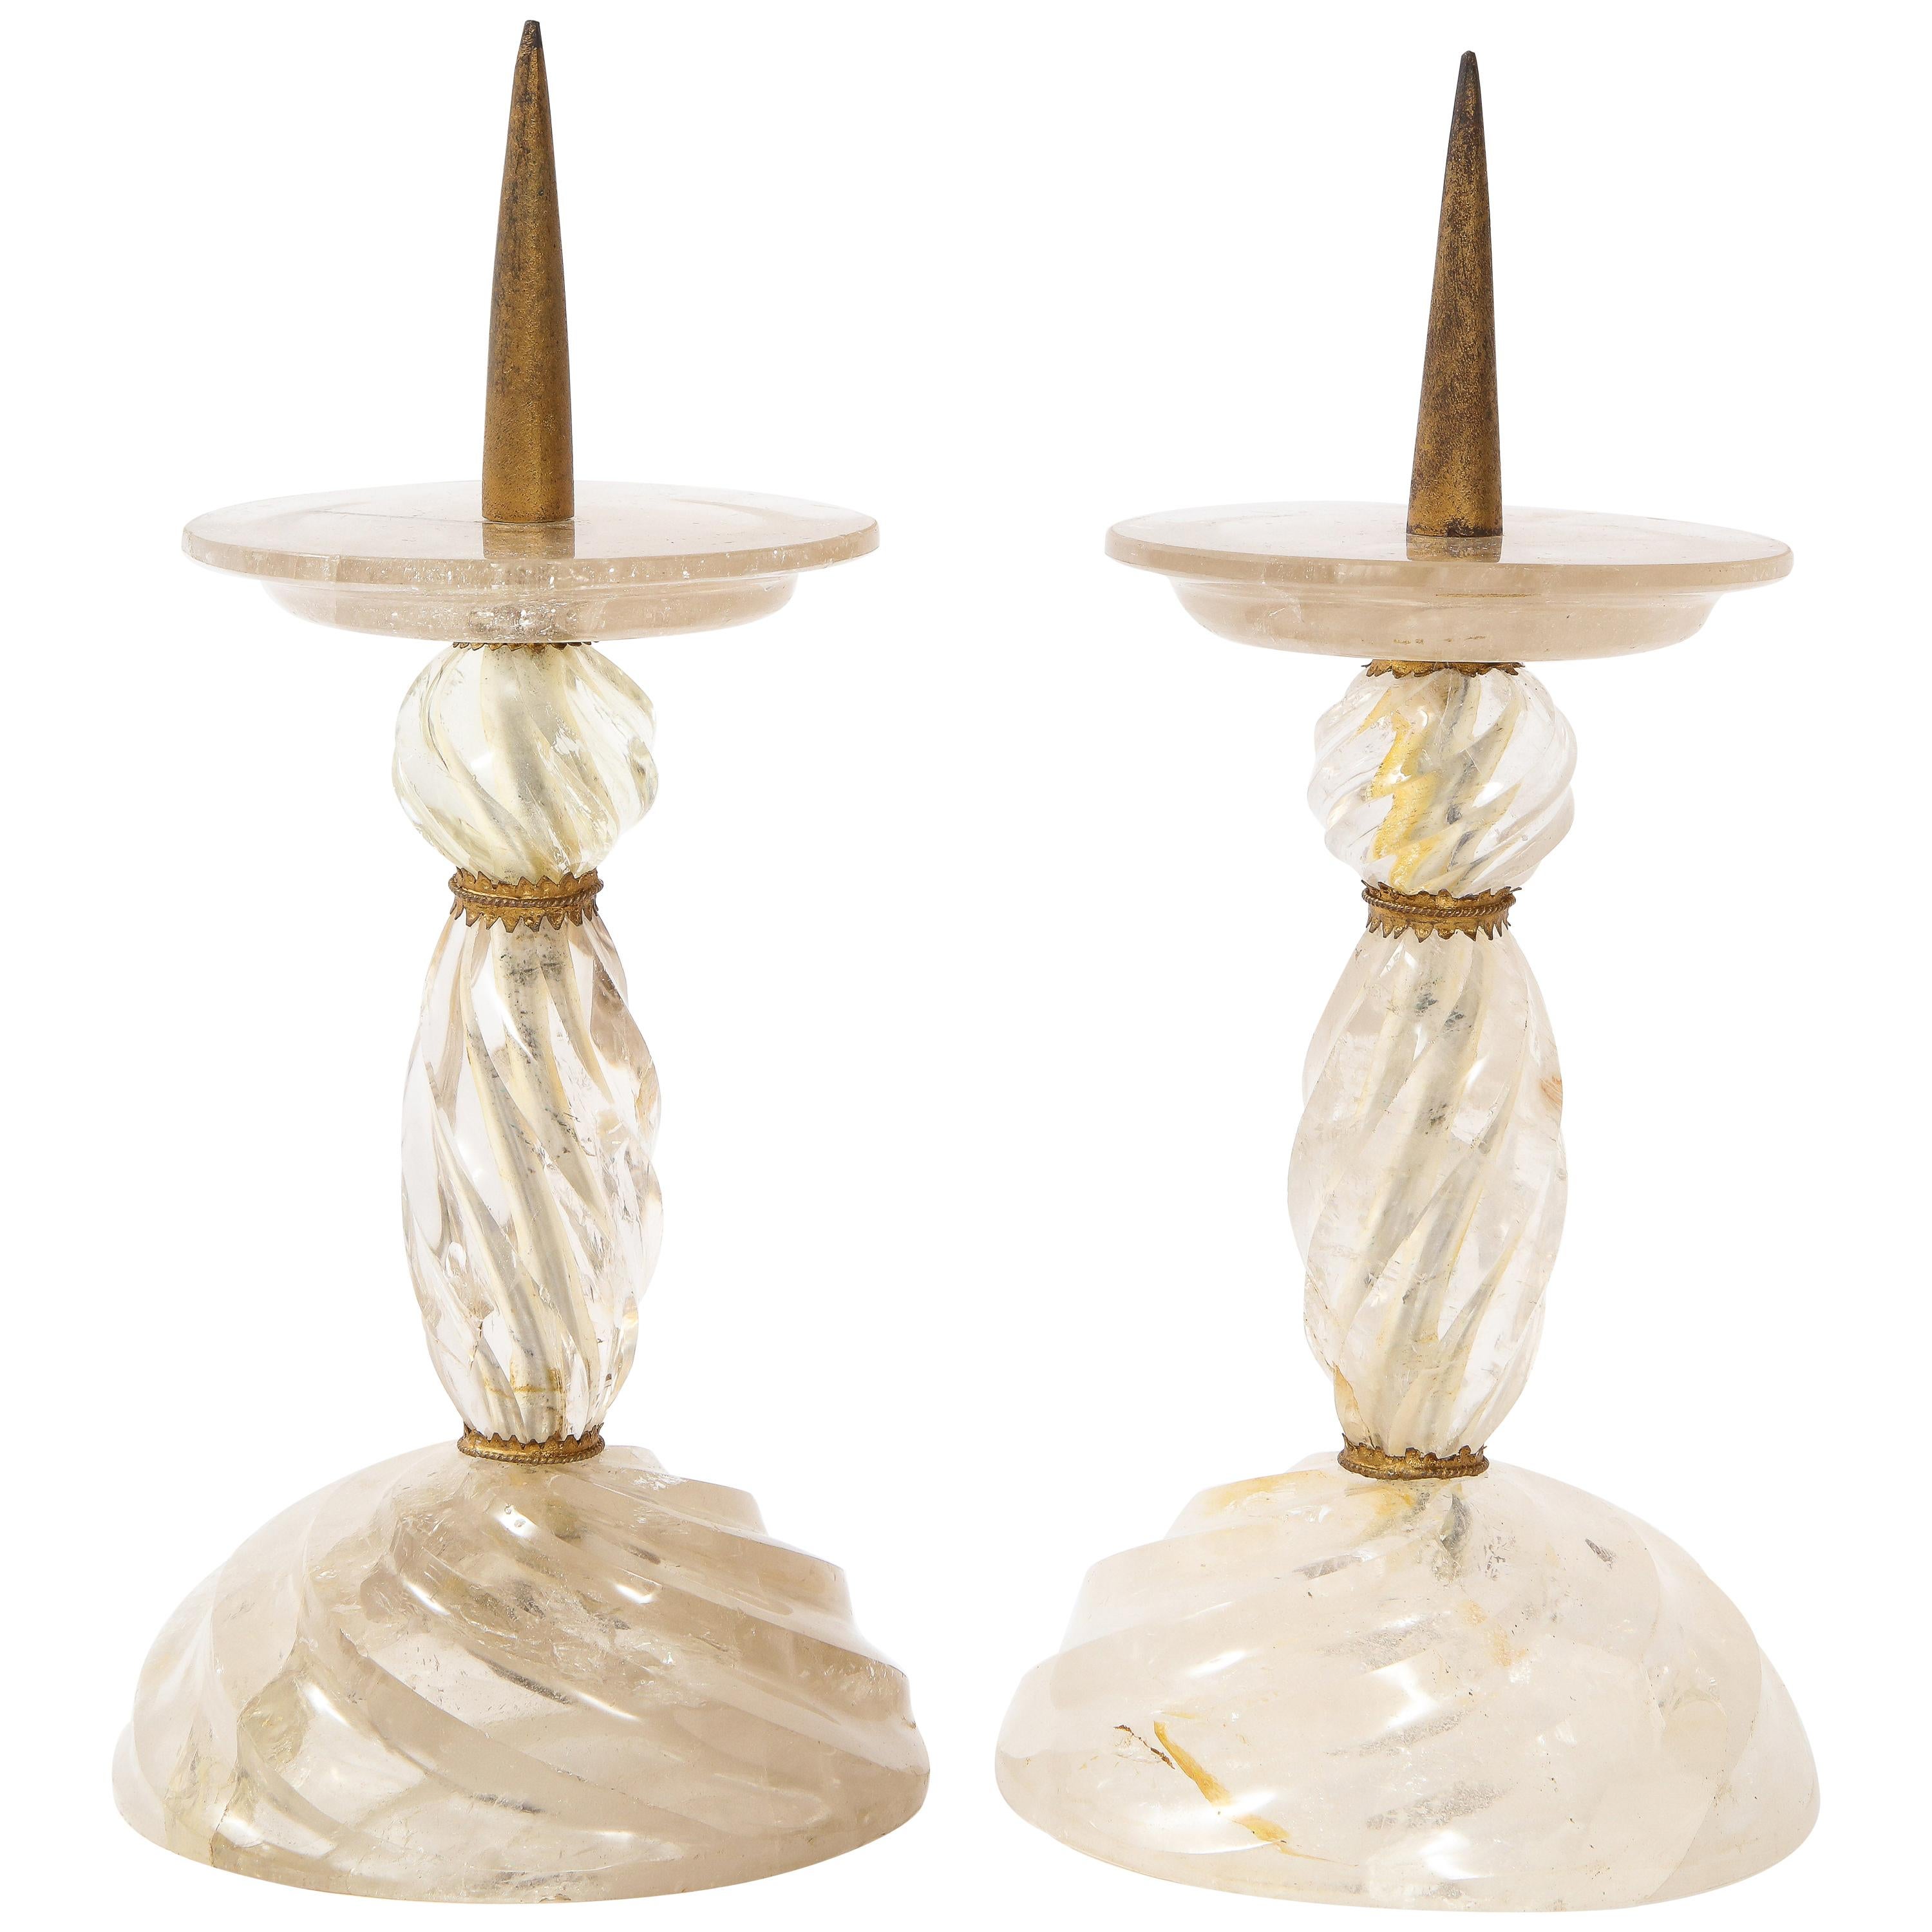 Pair of French Dore Bronze Mounted Rock Crystal Hand Carved Spiked Candlesticks